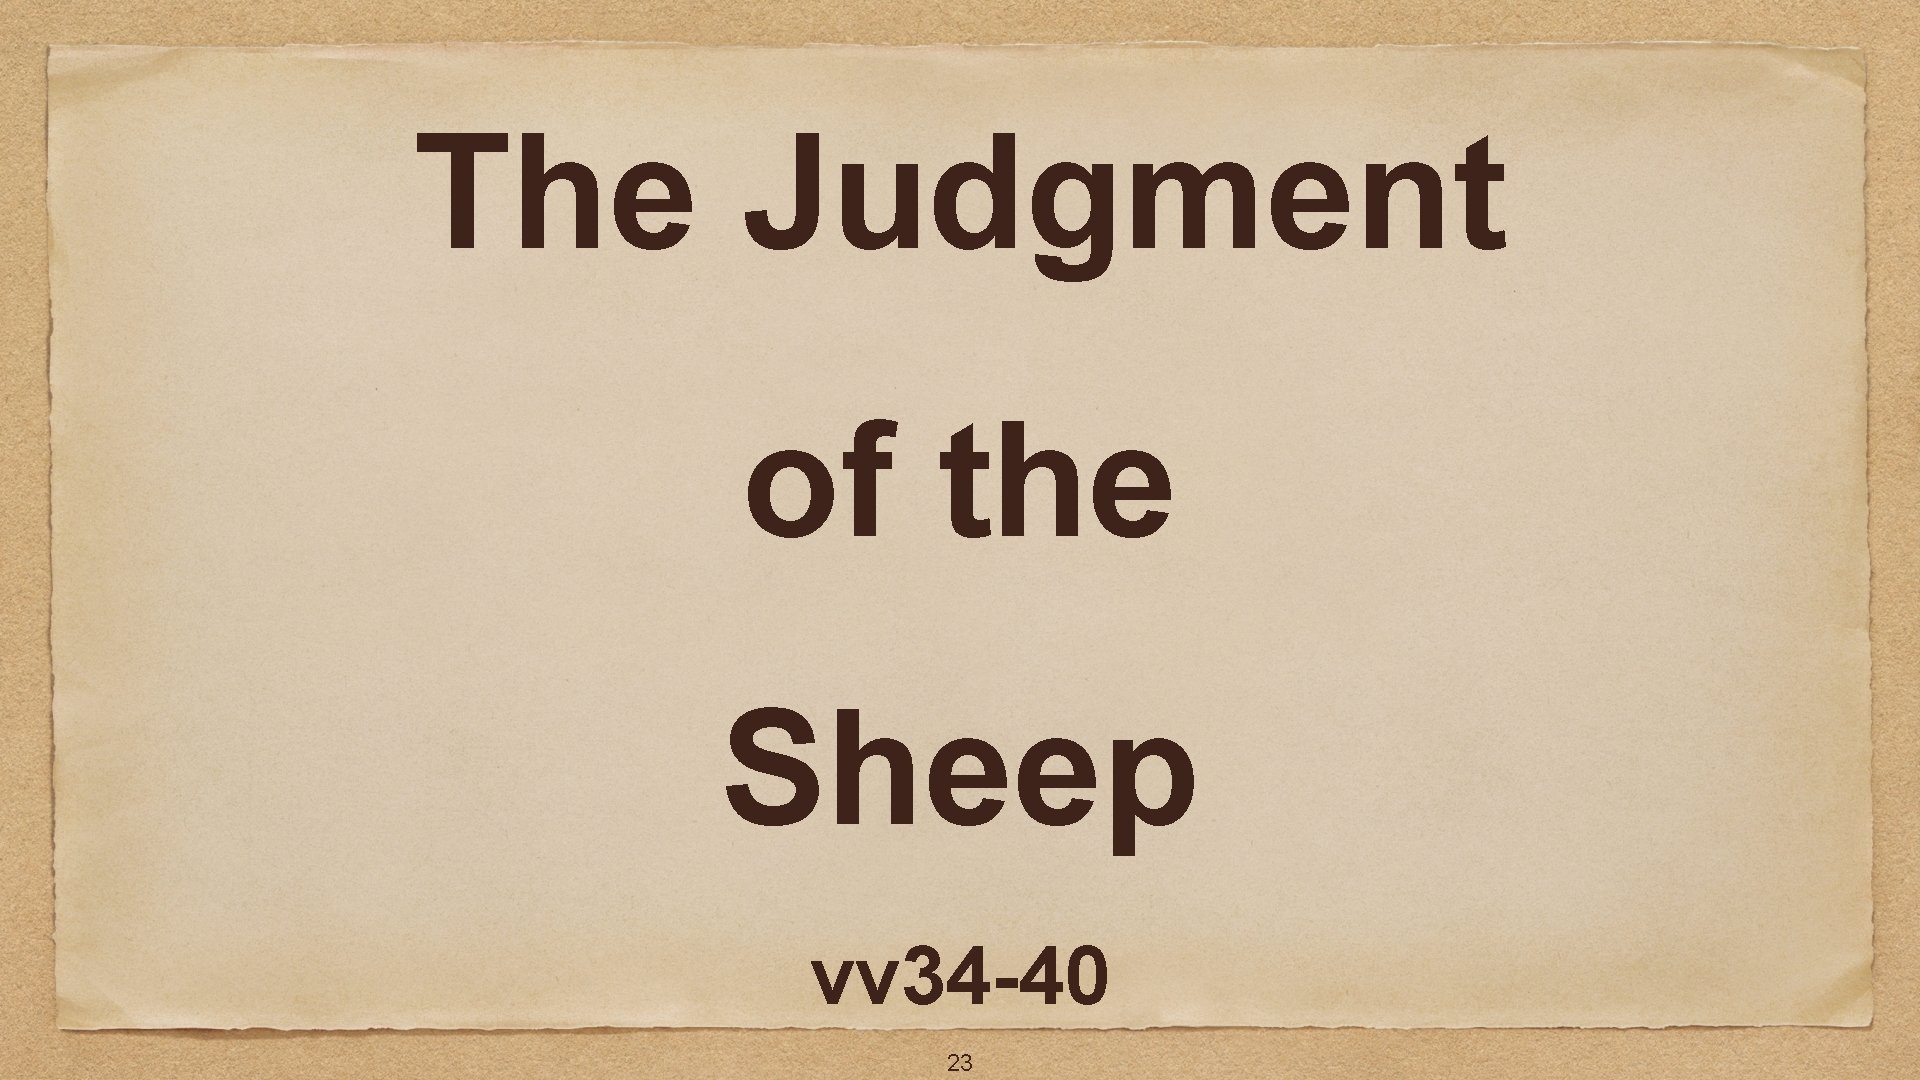 The Judgment of the Sheep vv 34 -40 23 